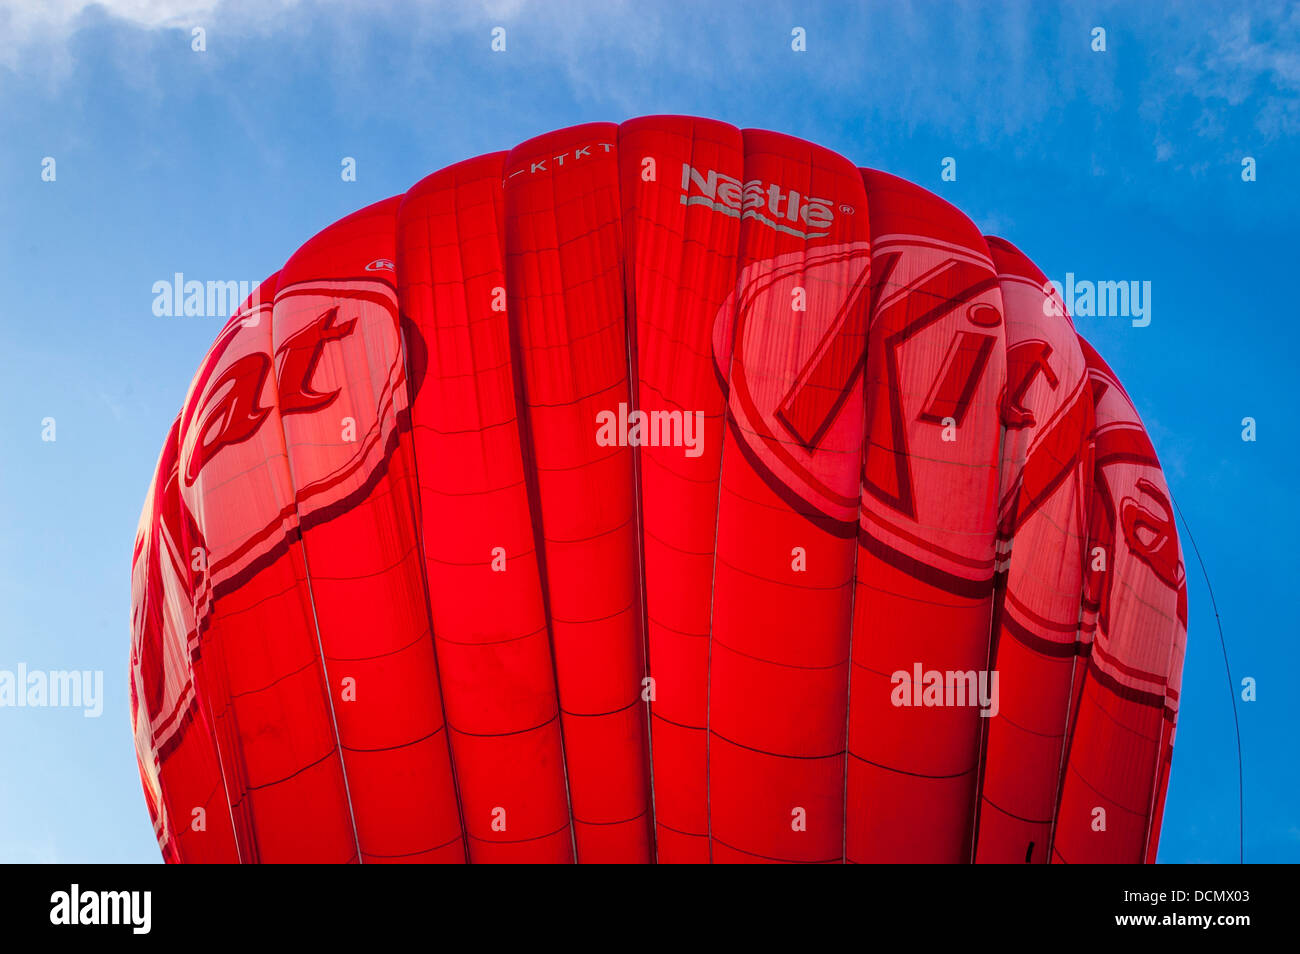 KitKat Hot air balloon being inflated Stock Photo